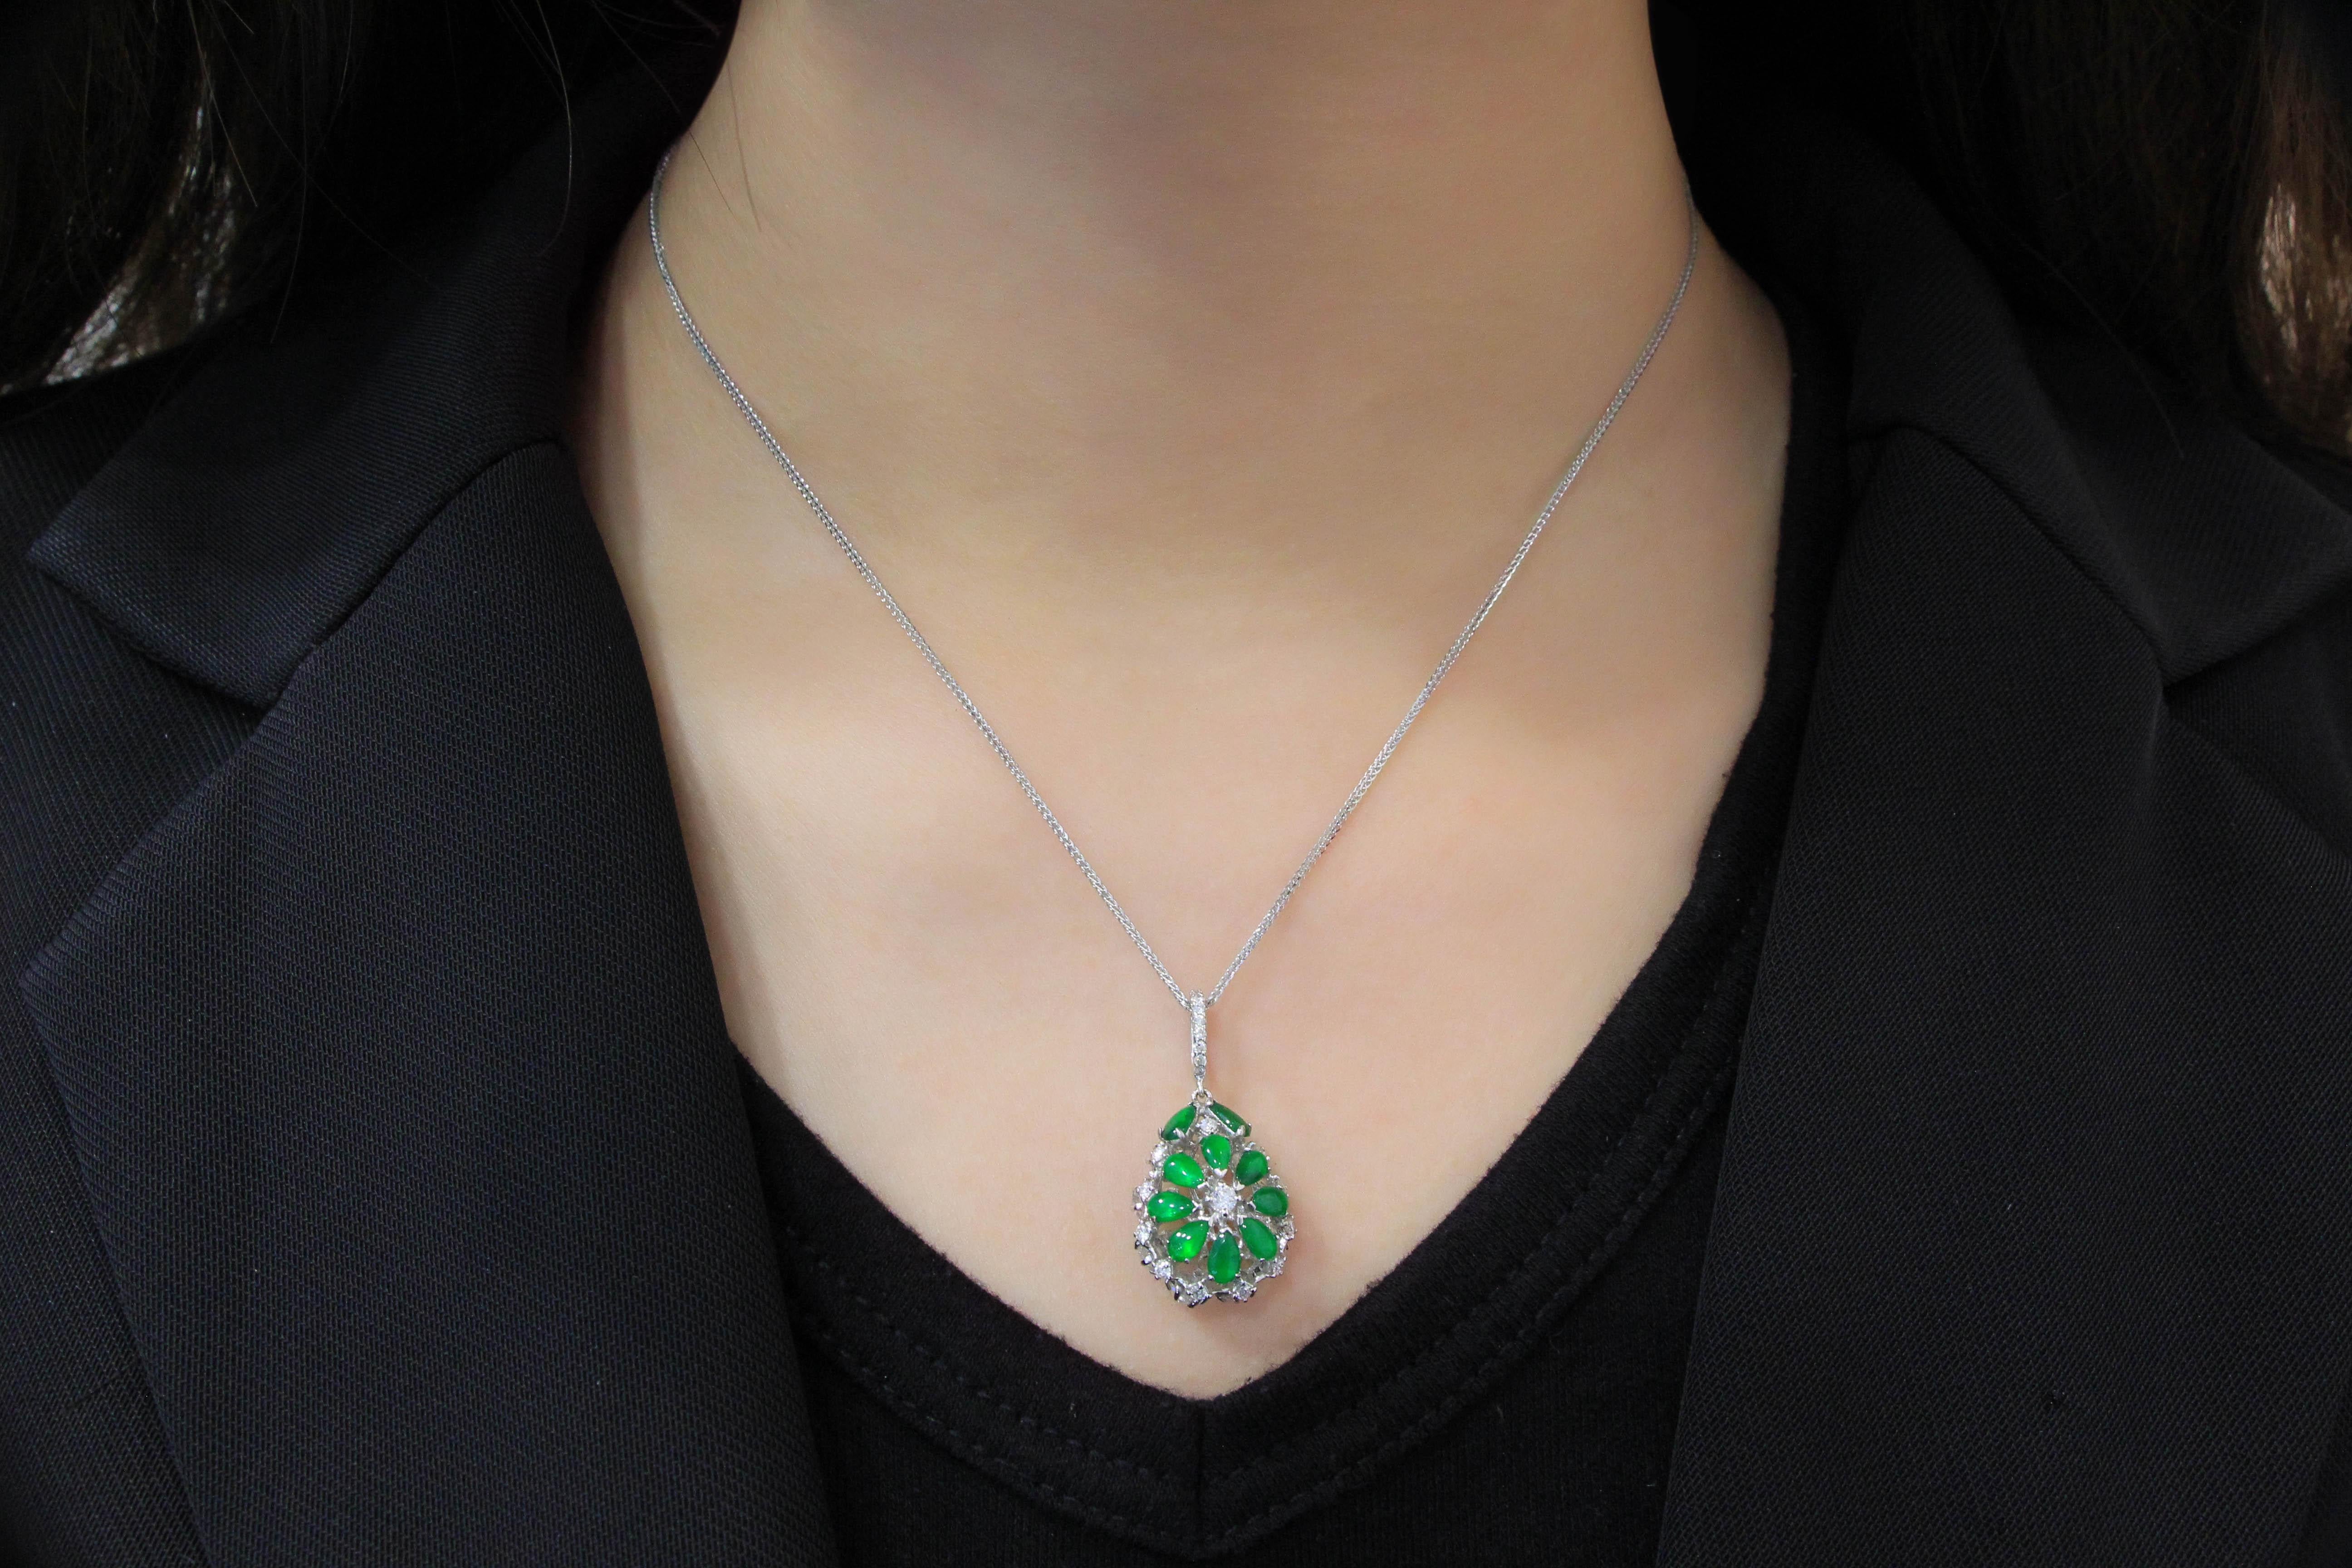 18 Karat White Gold Jadeite and Diamond 2-Sided Pendant with Necklace In New Condition For Sale In Macau, MO